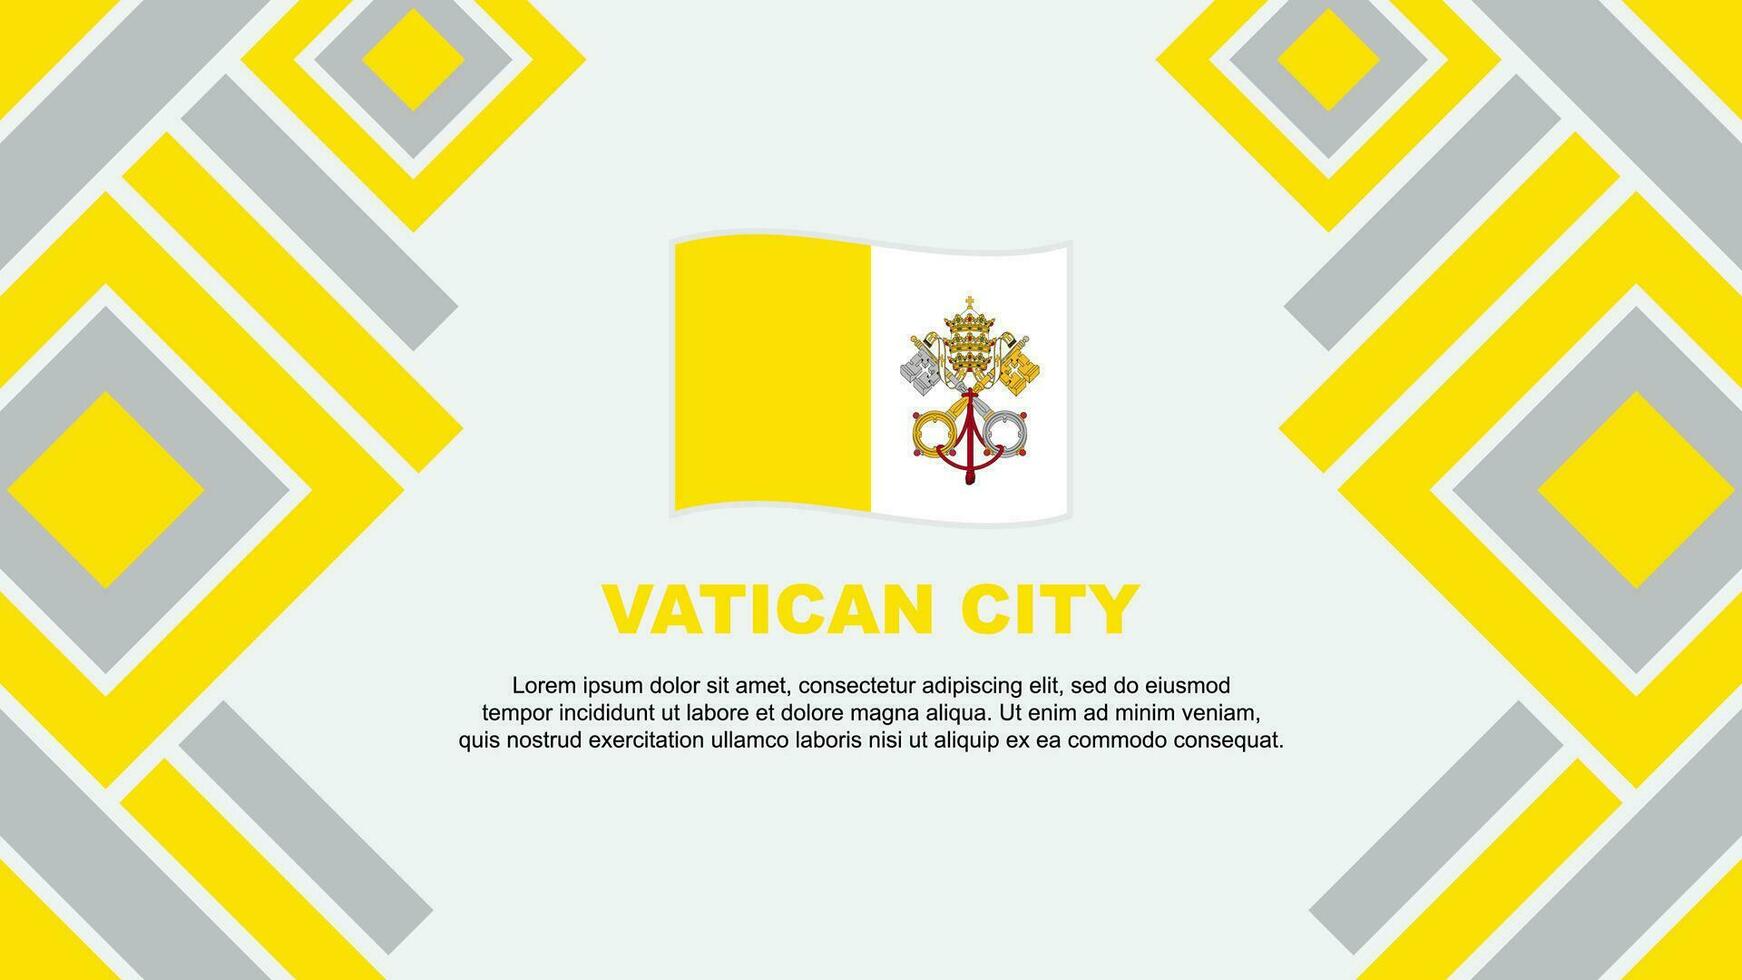 Vatican City Flag Abstract Background Design Template. Vatican City Independence Day Banner Wallpaper Vector Illustration. Vatican City